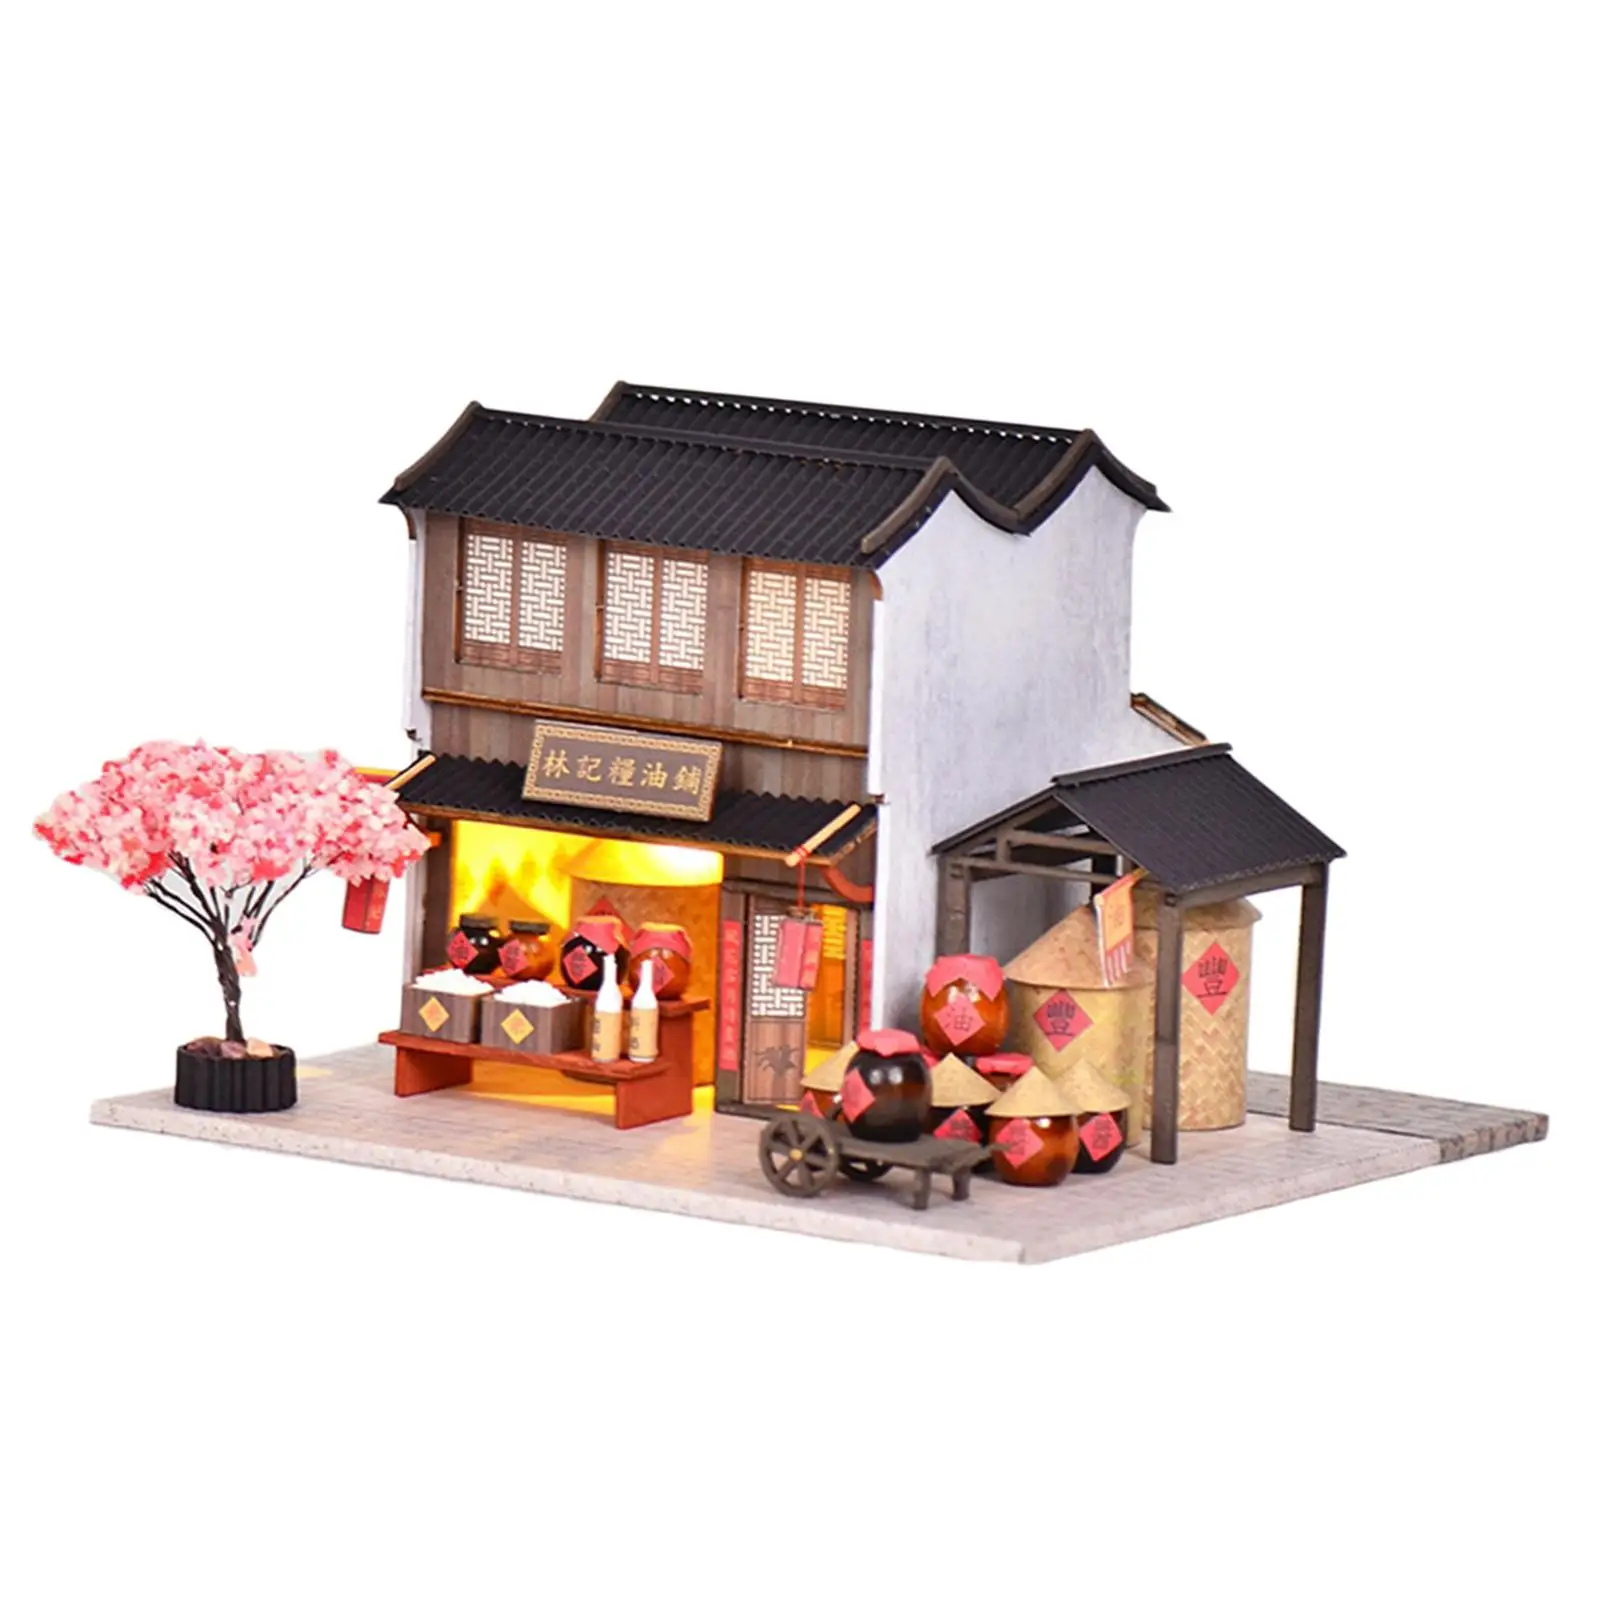 Wooden DIY Cottage Kit Accessories Chic Gift for Women Girls Boys Teens